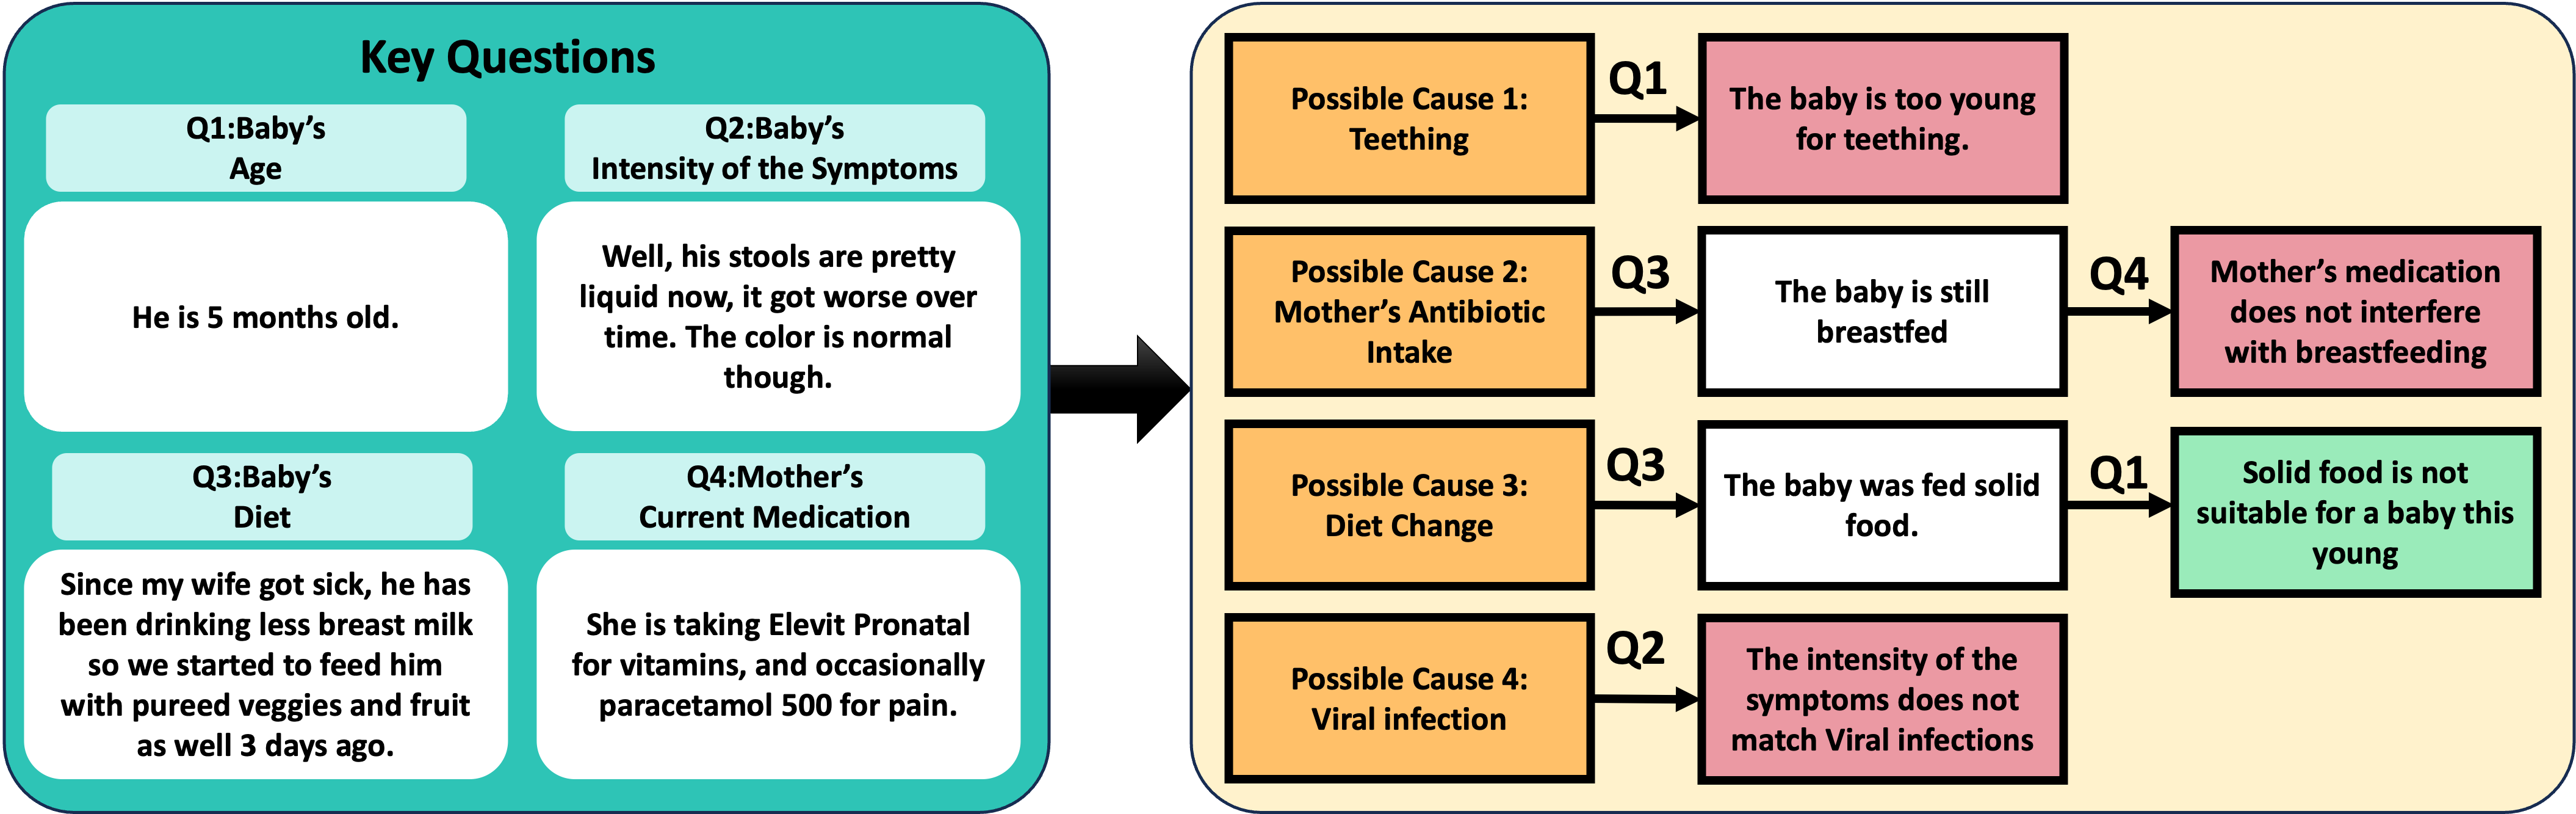 Diagnostic Strategy in the 'Father Inquiry' Scenario of PharmaSim. There are 4 key questions including Baby's age, baby's intensity of the symptoms, baby's diet, and mother's current medication with the father's response to to them in the left. In the right, the four possible causes teething, mother's antibiotic intake, diet change, and viral infection are investigated by different key questions.